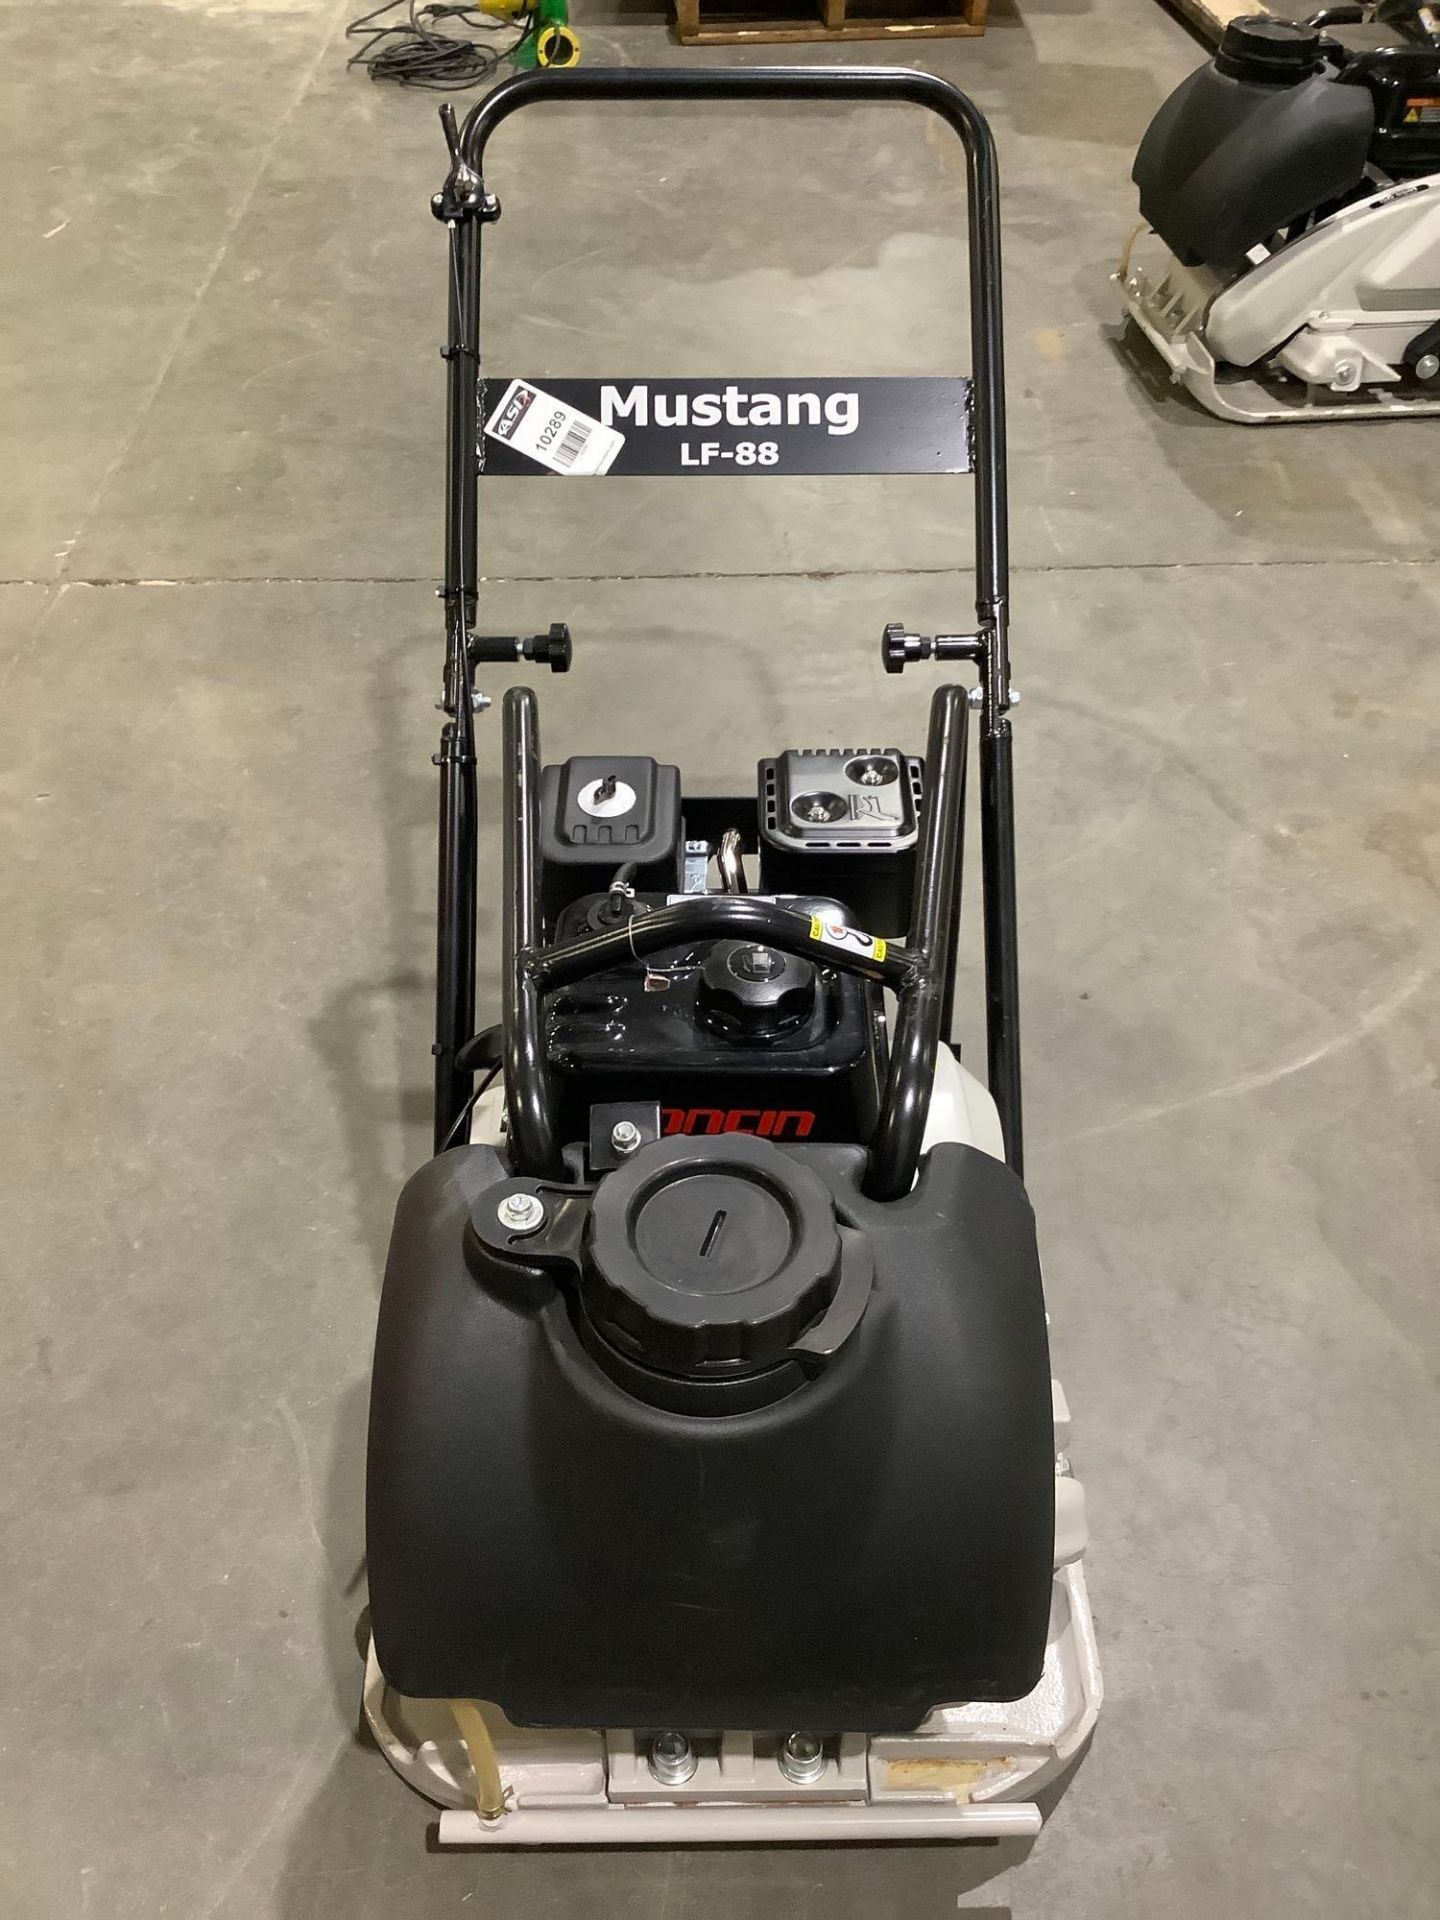 UNUSED MUSTANG LF-88 PLATE COMPACTOR WITH LONCIN 196cc ENGINE, GAS POWERED - Image 11 of 12